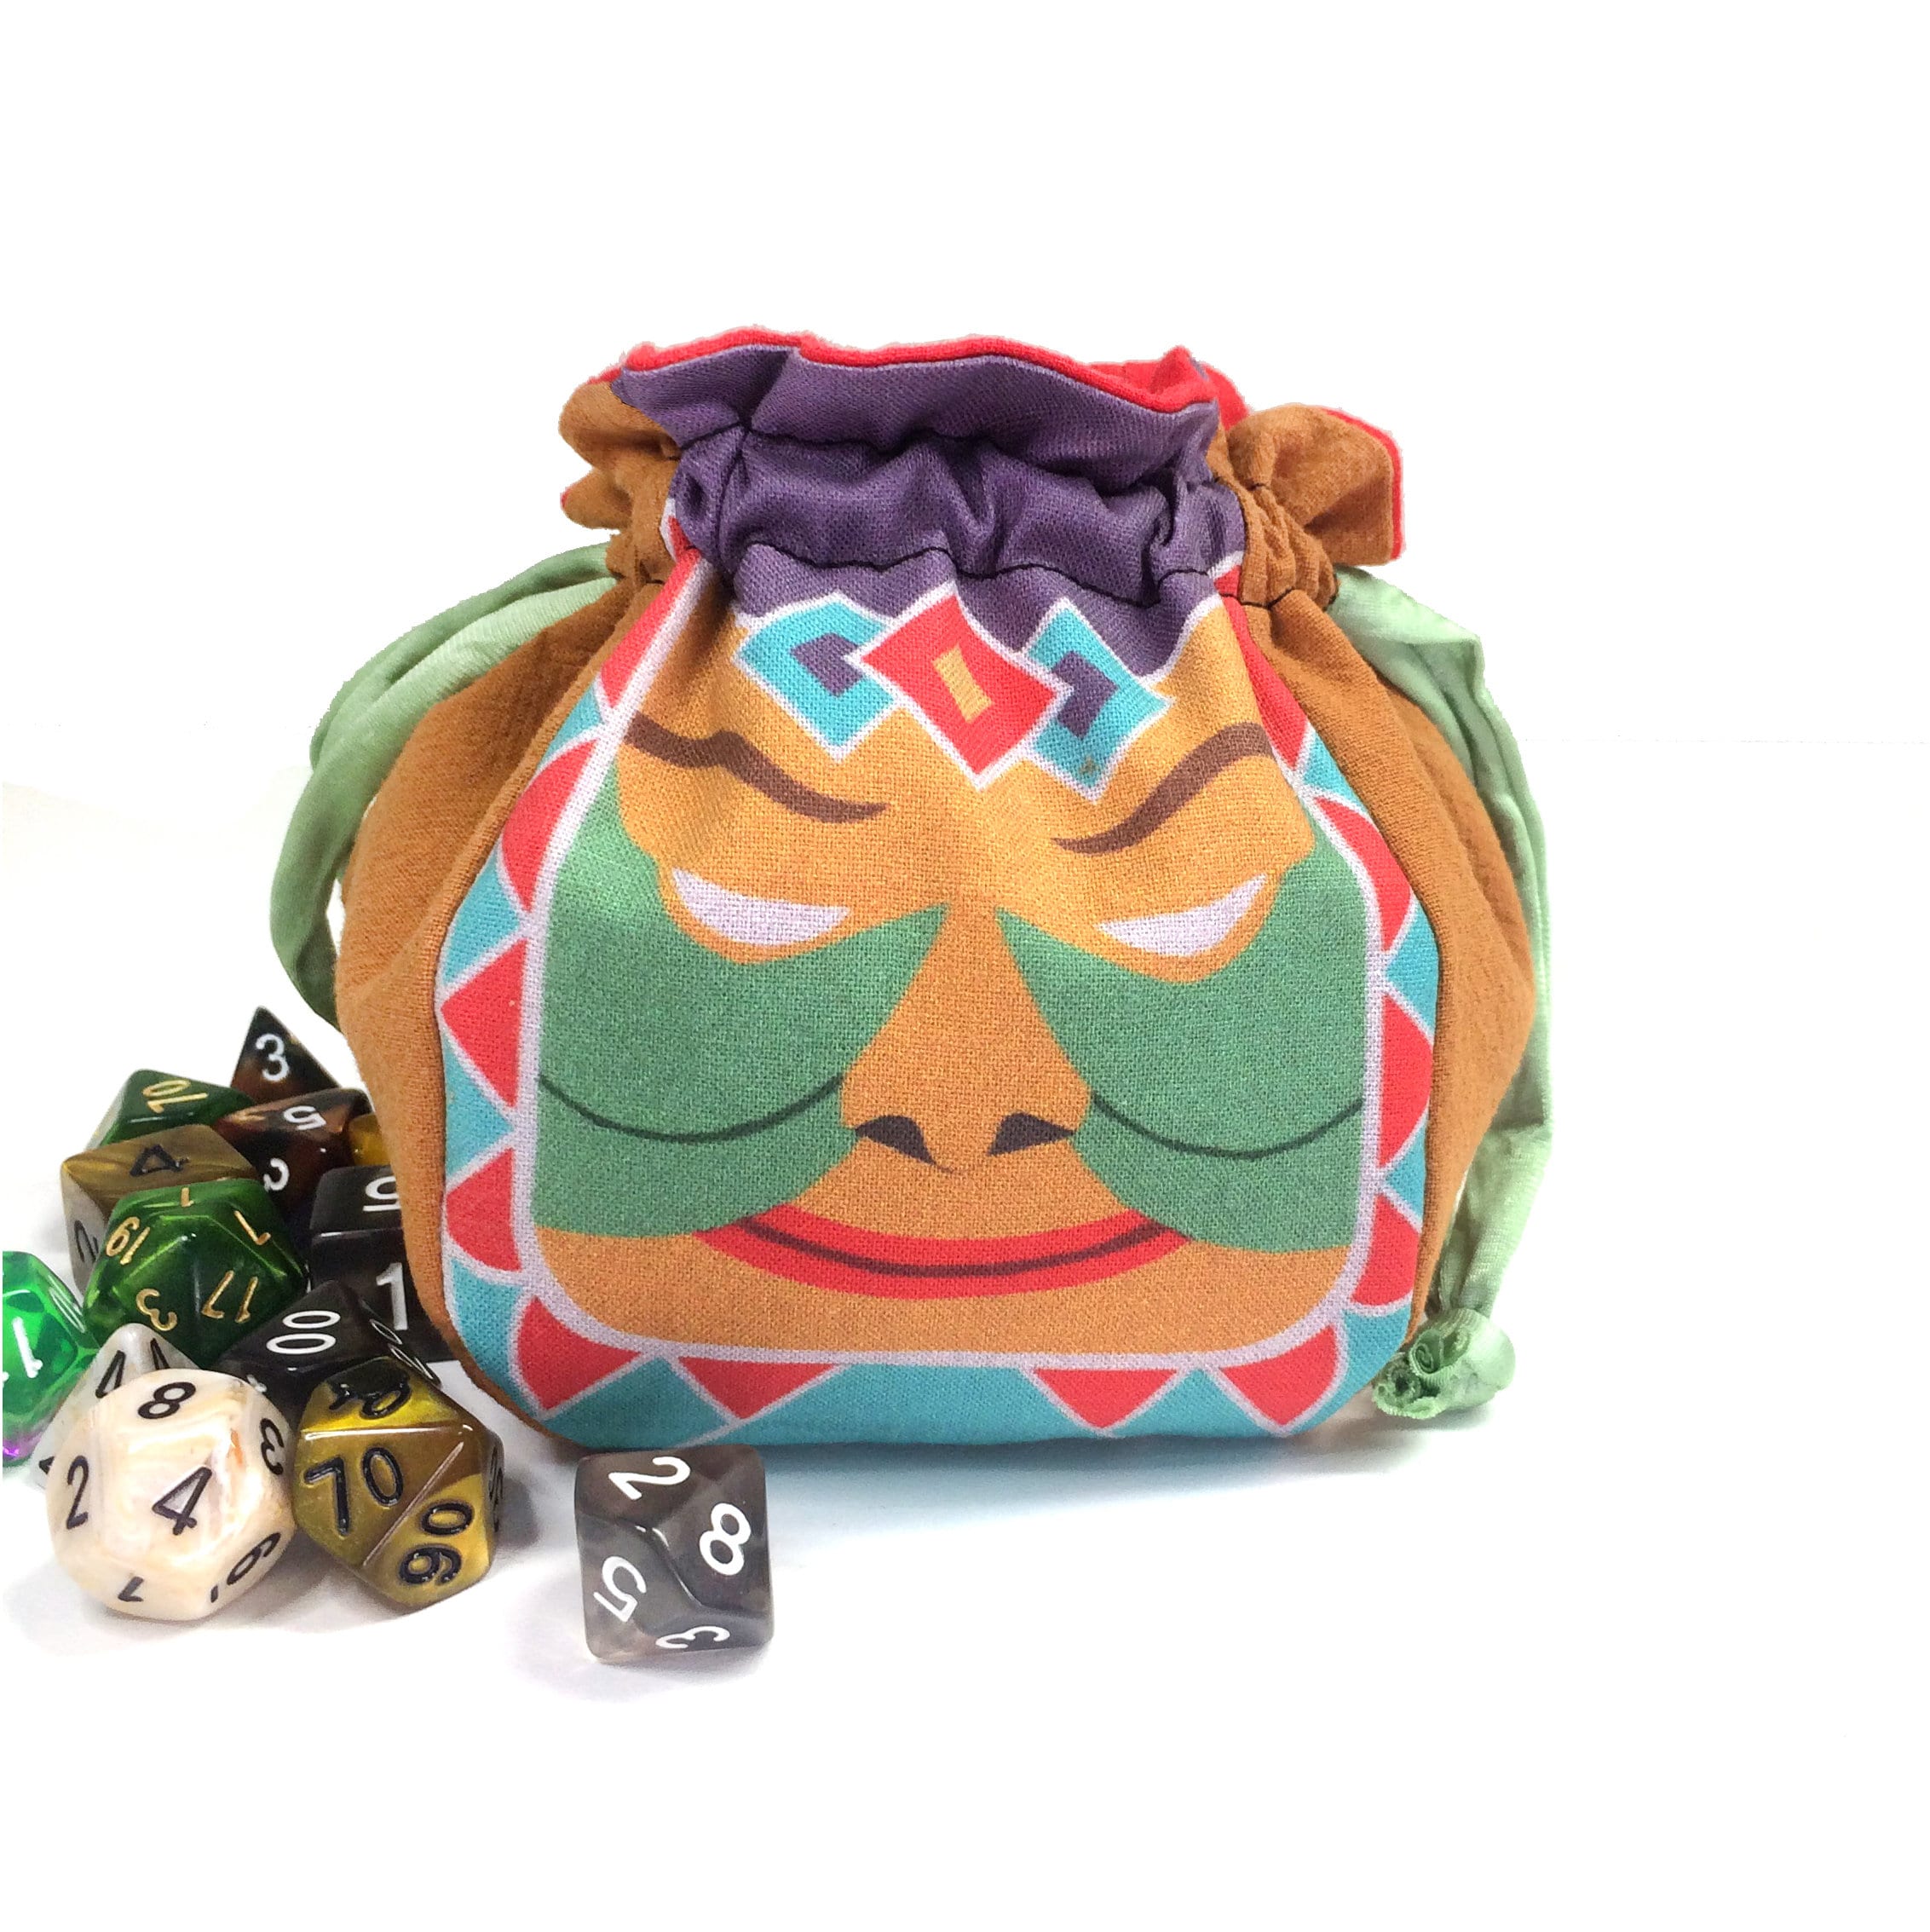 D&D Gamer Pouch: Bag of Holding